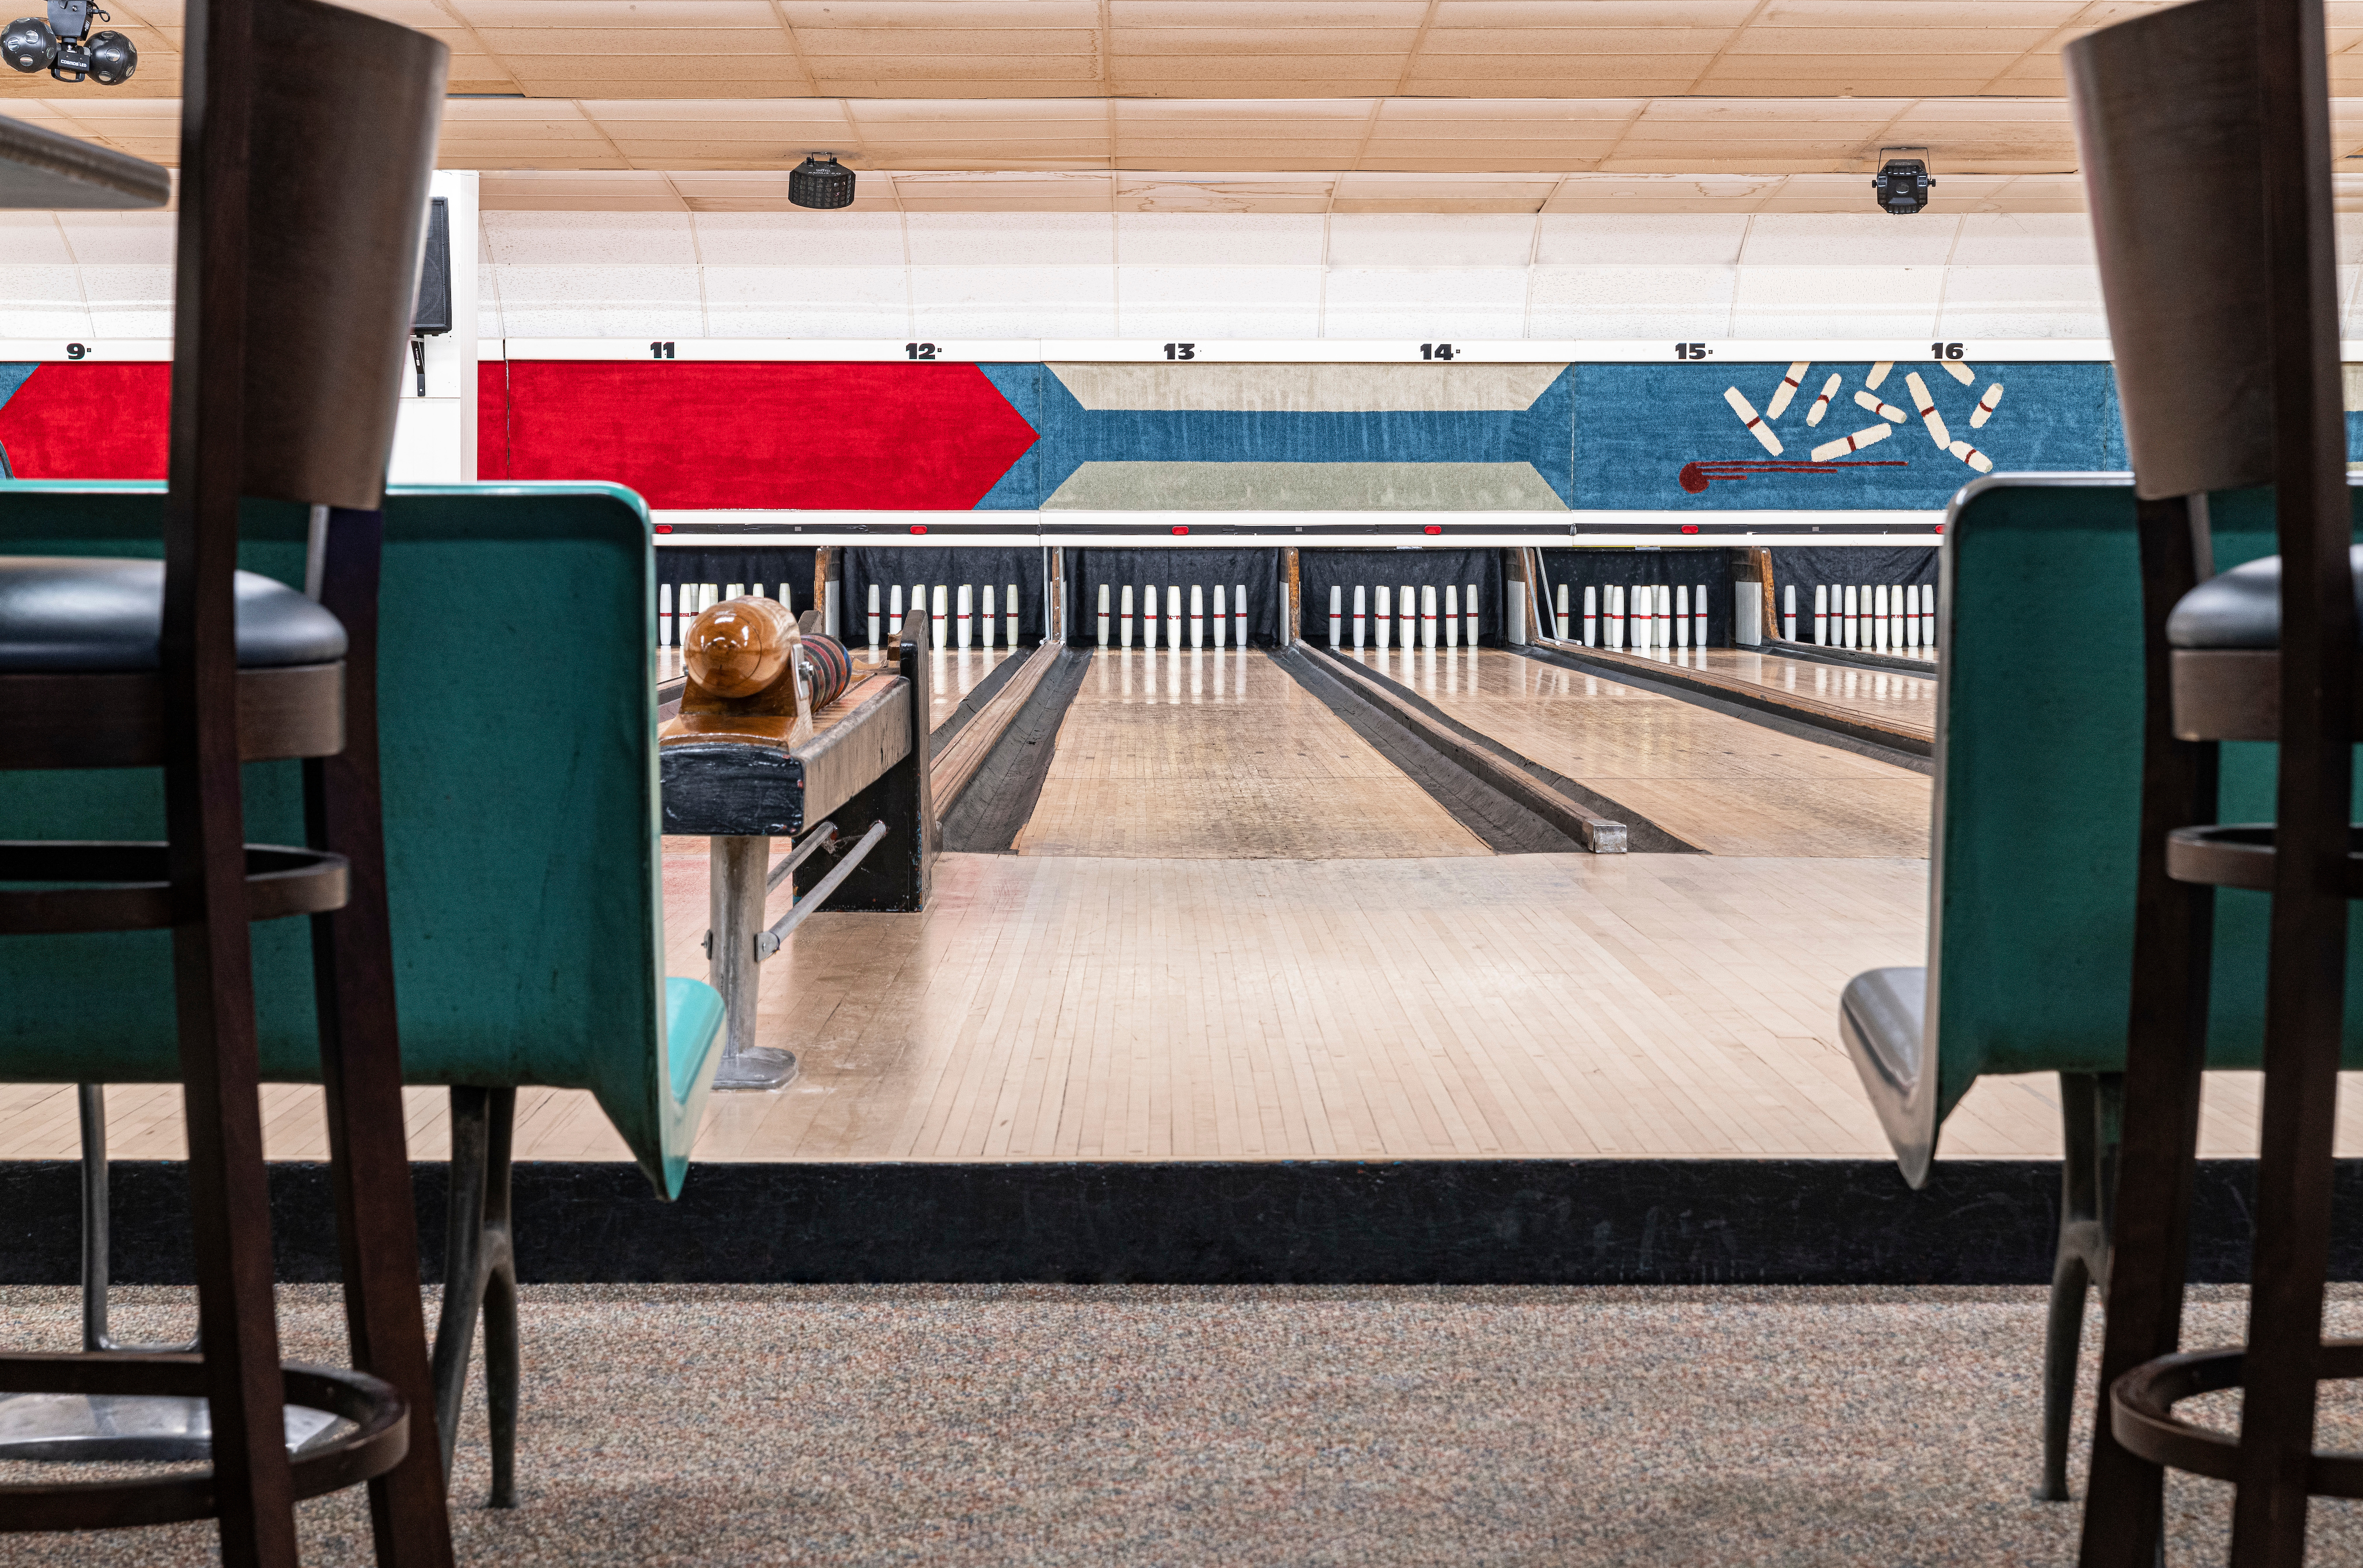 Older adults continue to embrace candlepin bowling